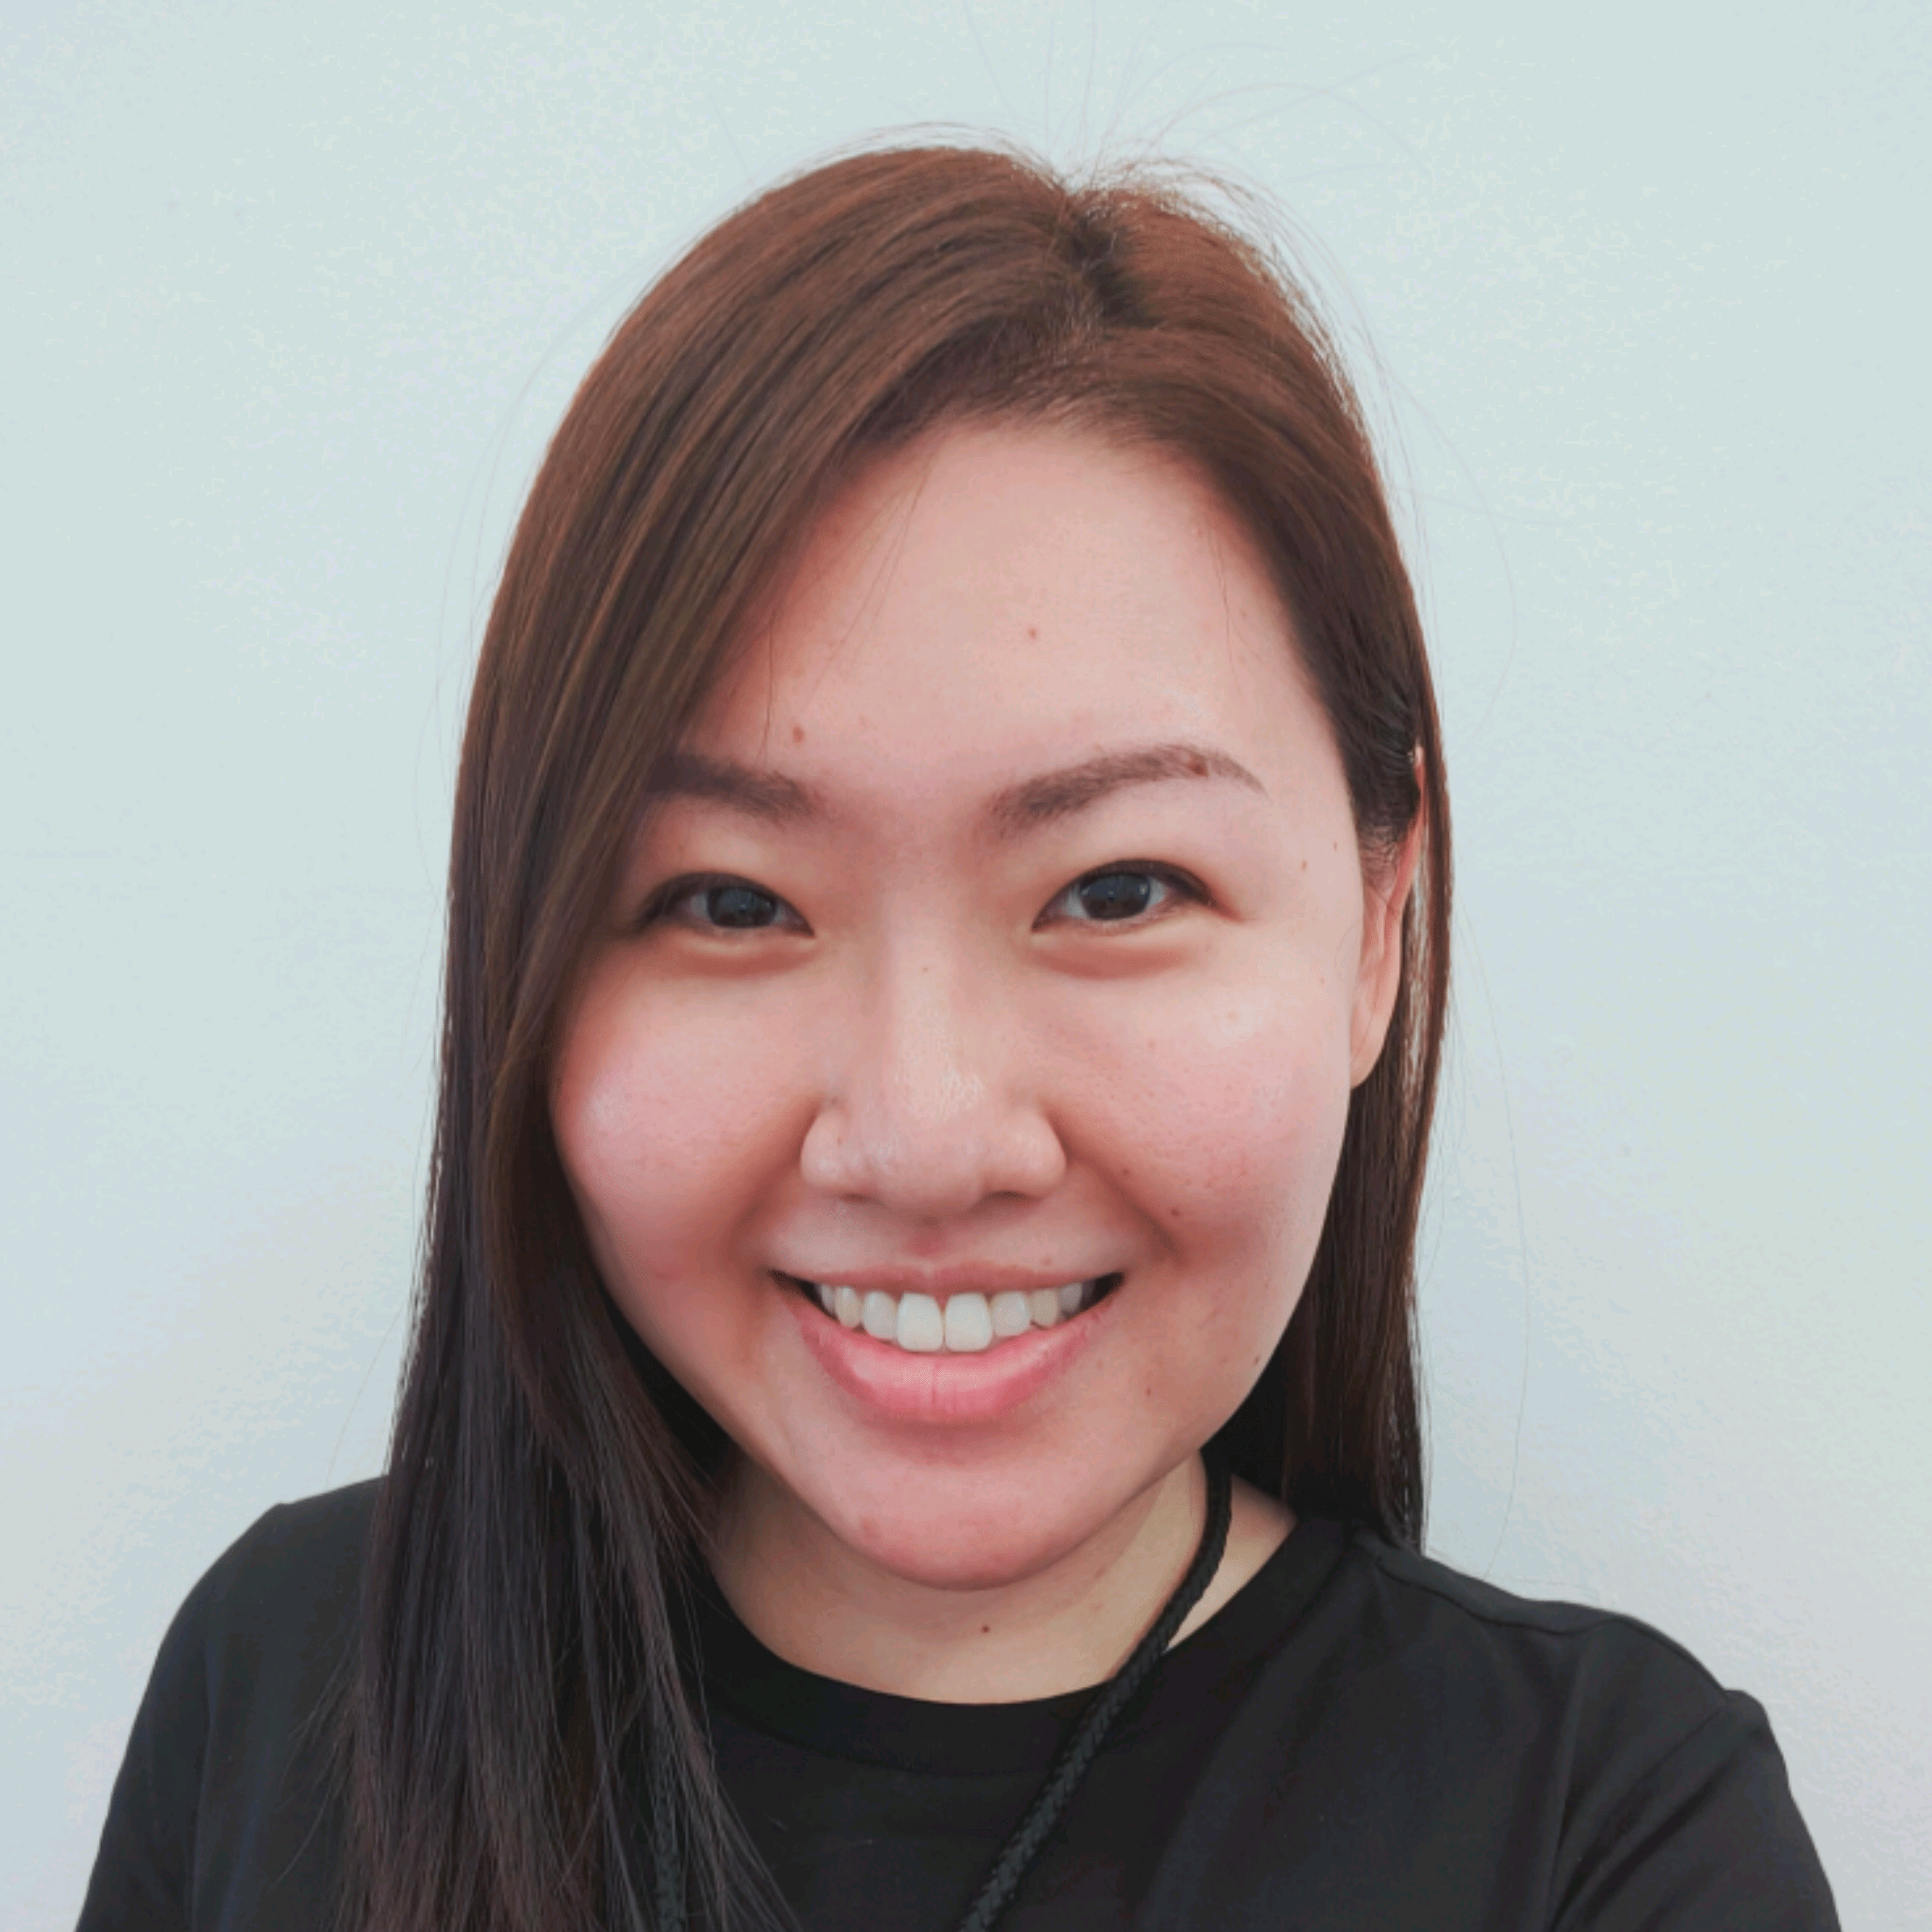 Celestine Chua is a Senior Psychotherapist and Counsellor. She uses techniques like Brianspotting and EMDR to help clients heal from trauma.